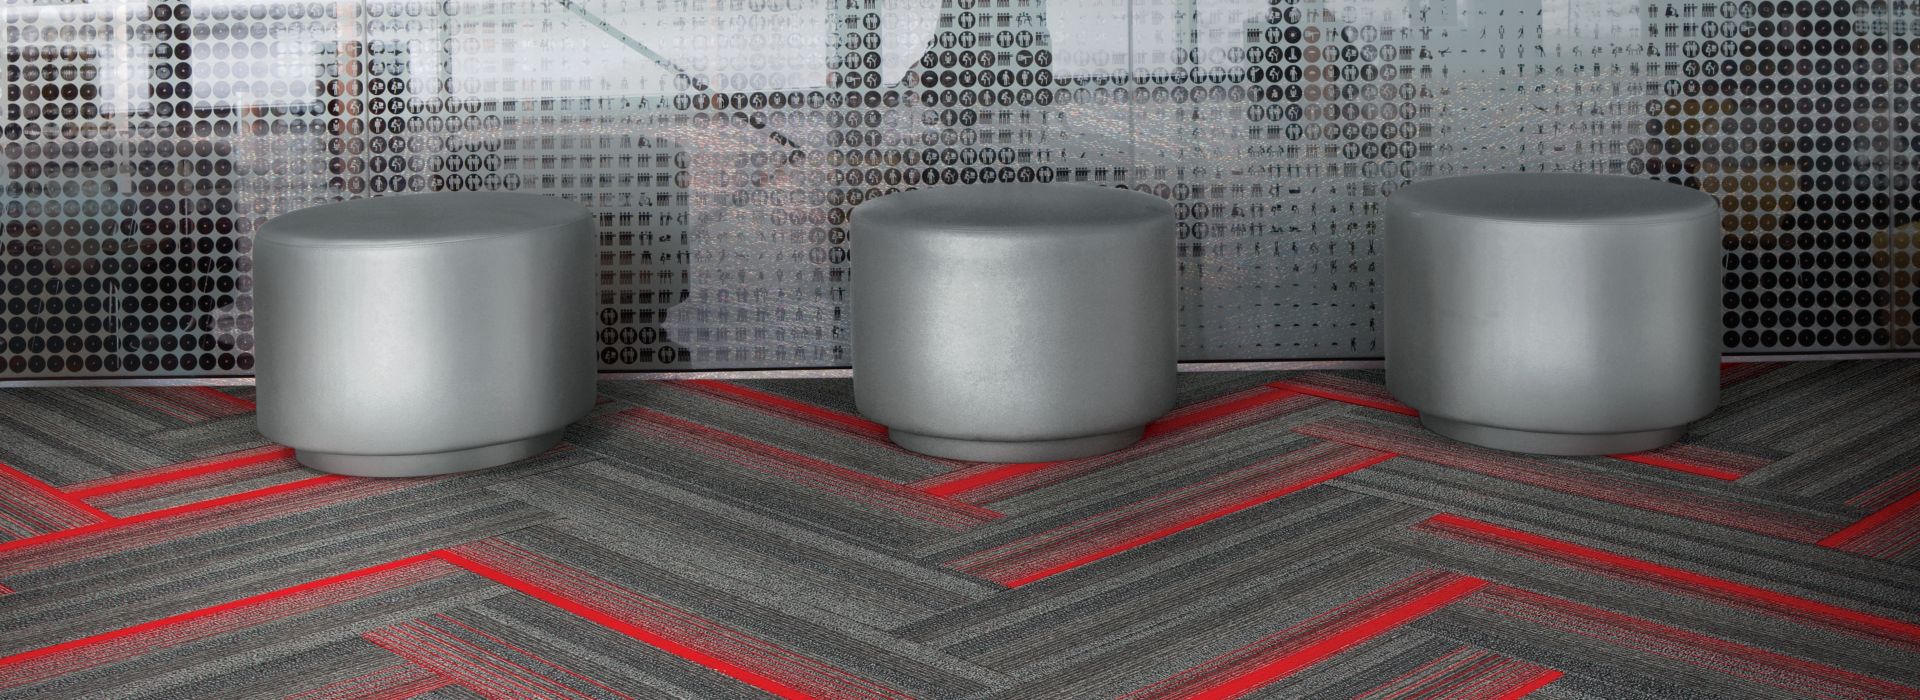 Interface SS217 and SS218 Carpet Tile in common area with three silver pots imagen número 1